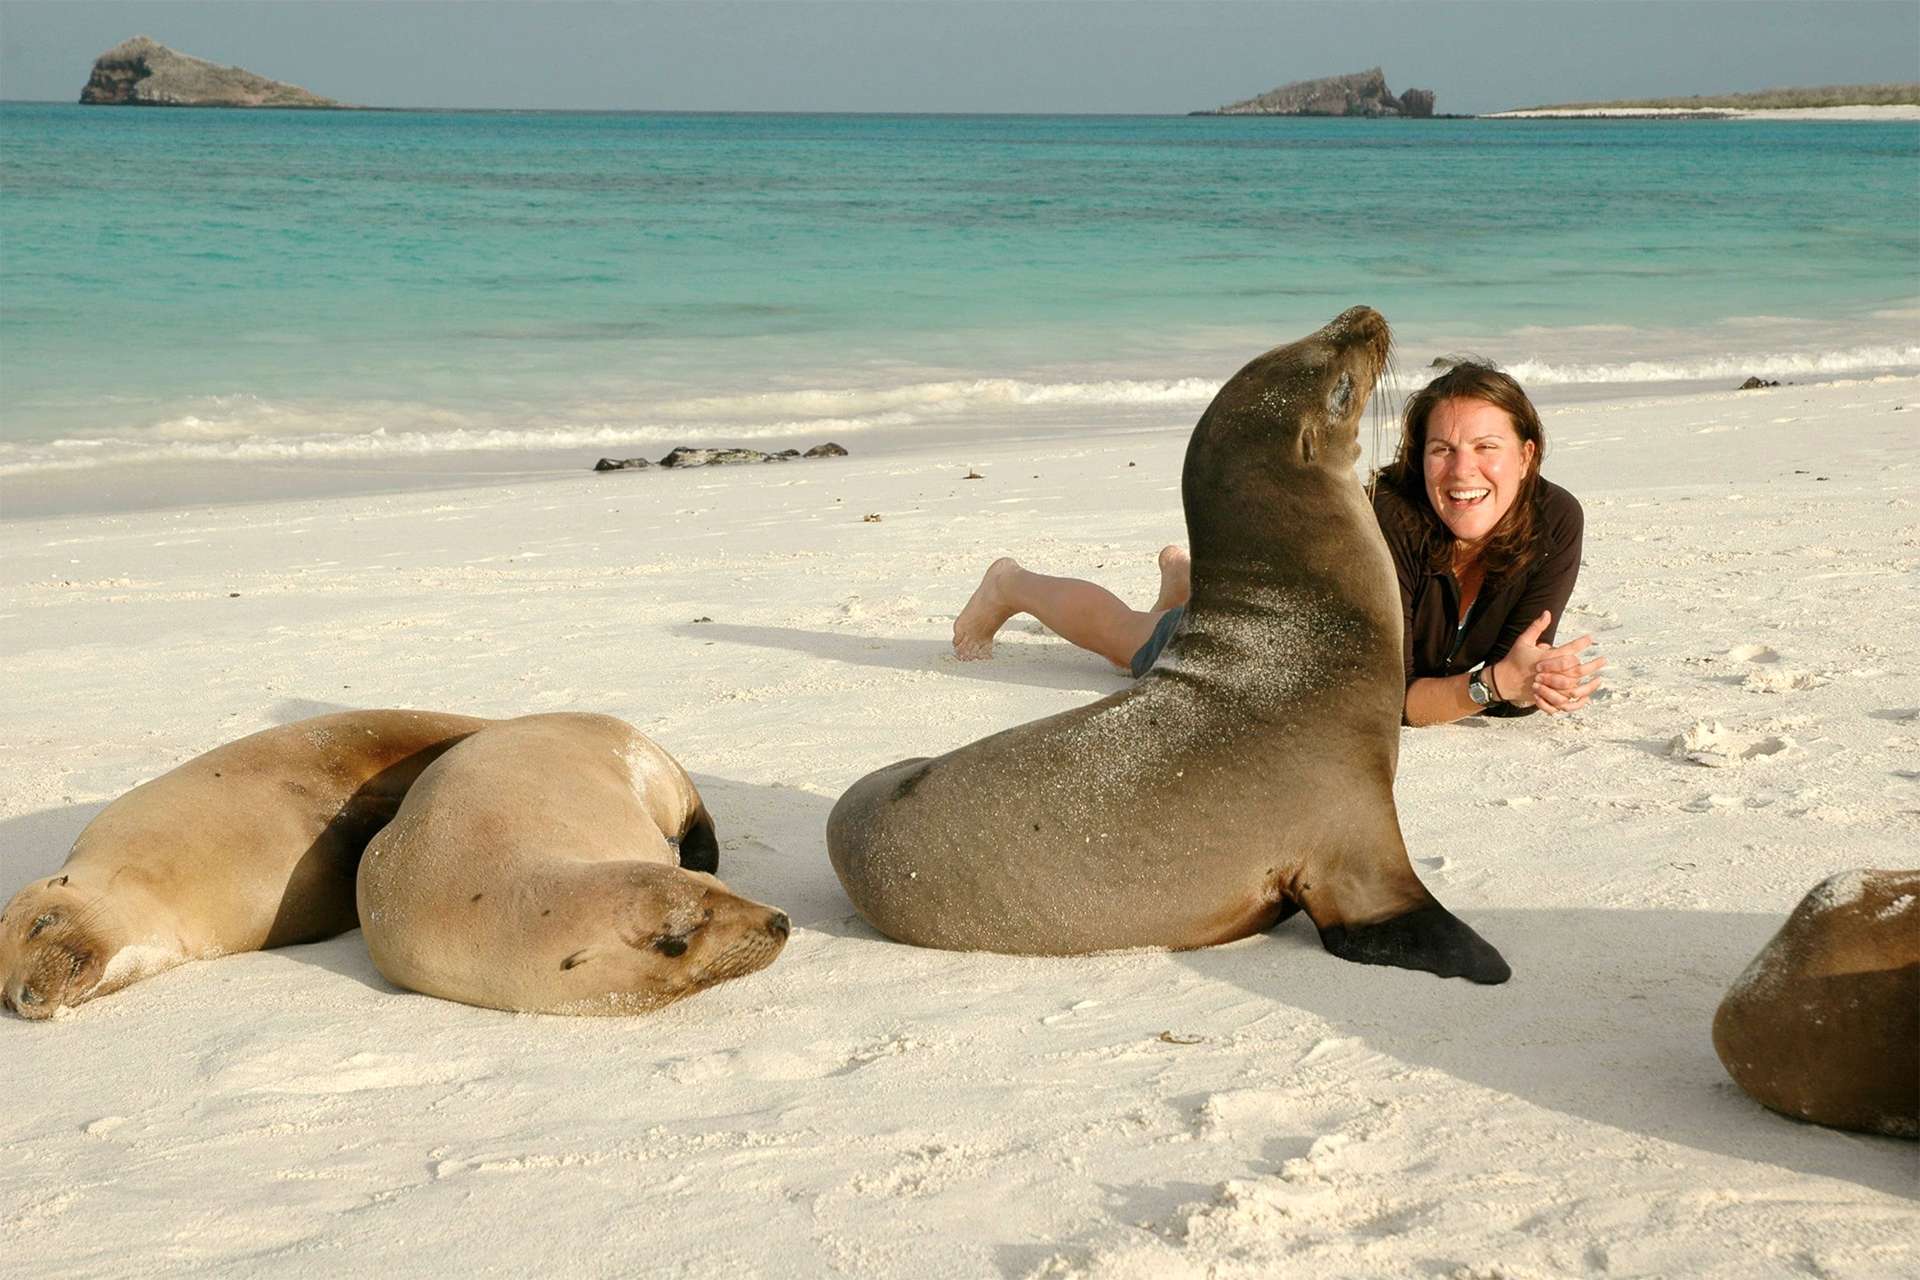 Woman traveler laughing and smiling gleefully surrounded by Galápagos sea lions basking in the sun